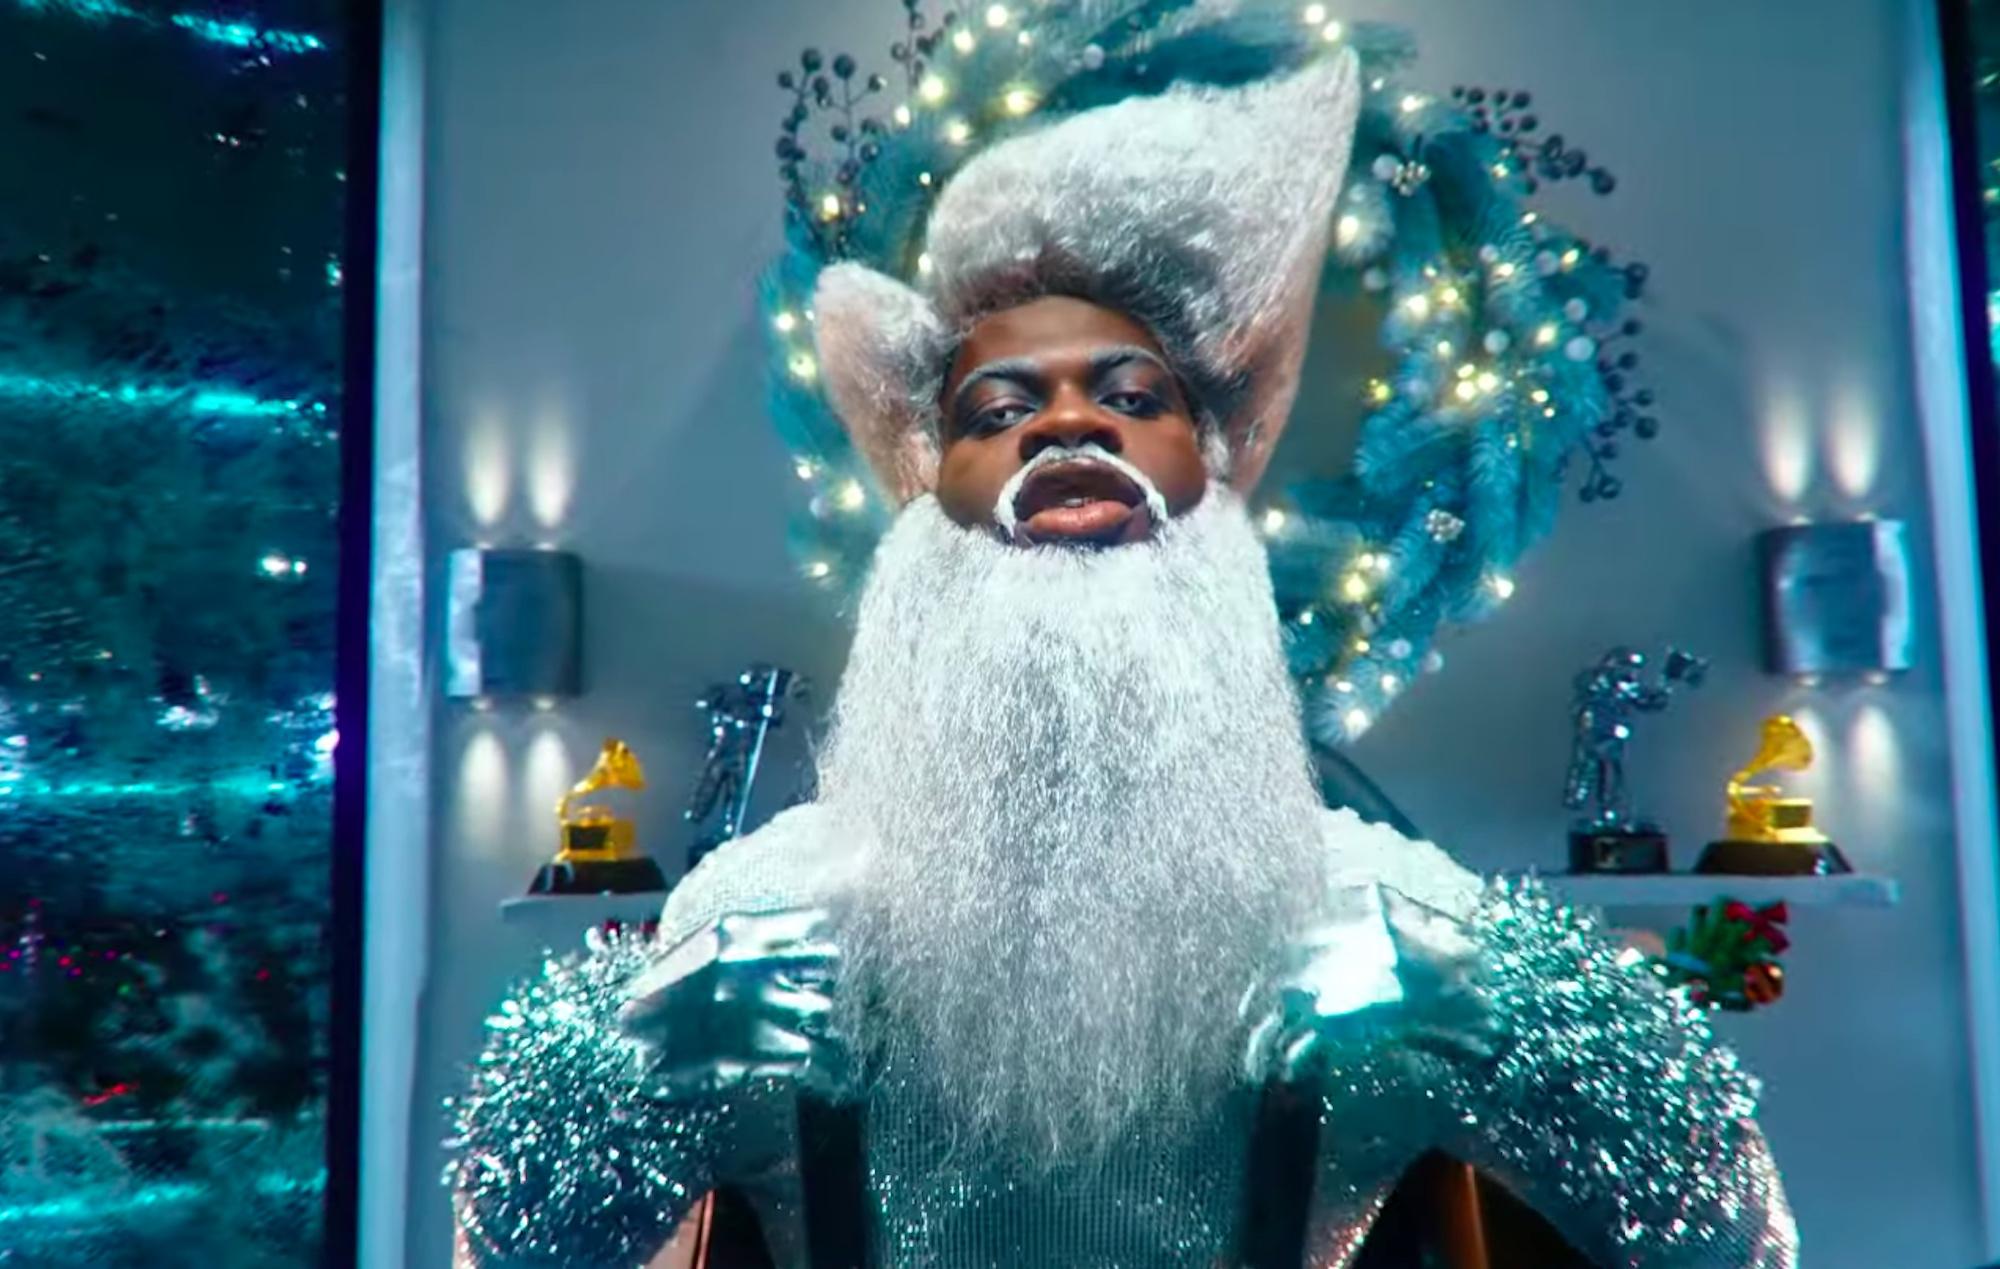 Lil Nas X Gets In The Christmas Spirit With Video For New Single